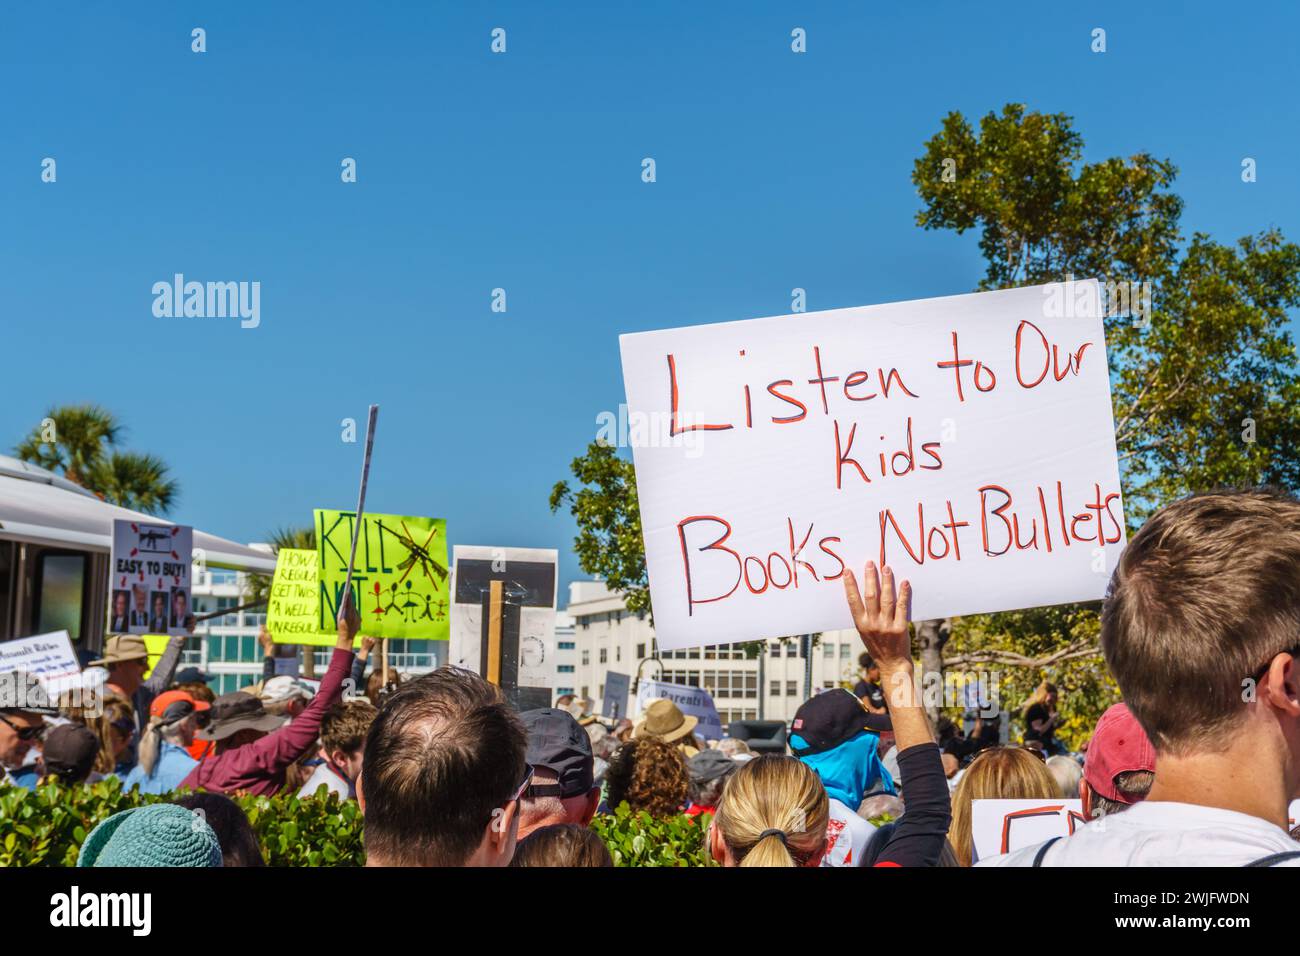 Sarasota, FL, US -March 24, 2018 - Protesters gather  holding sign reading 'Listen to our Kids Books not Bullets' Stock Photo